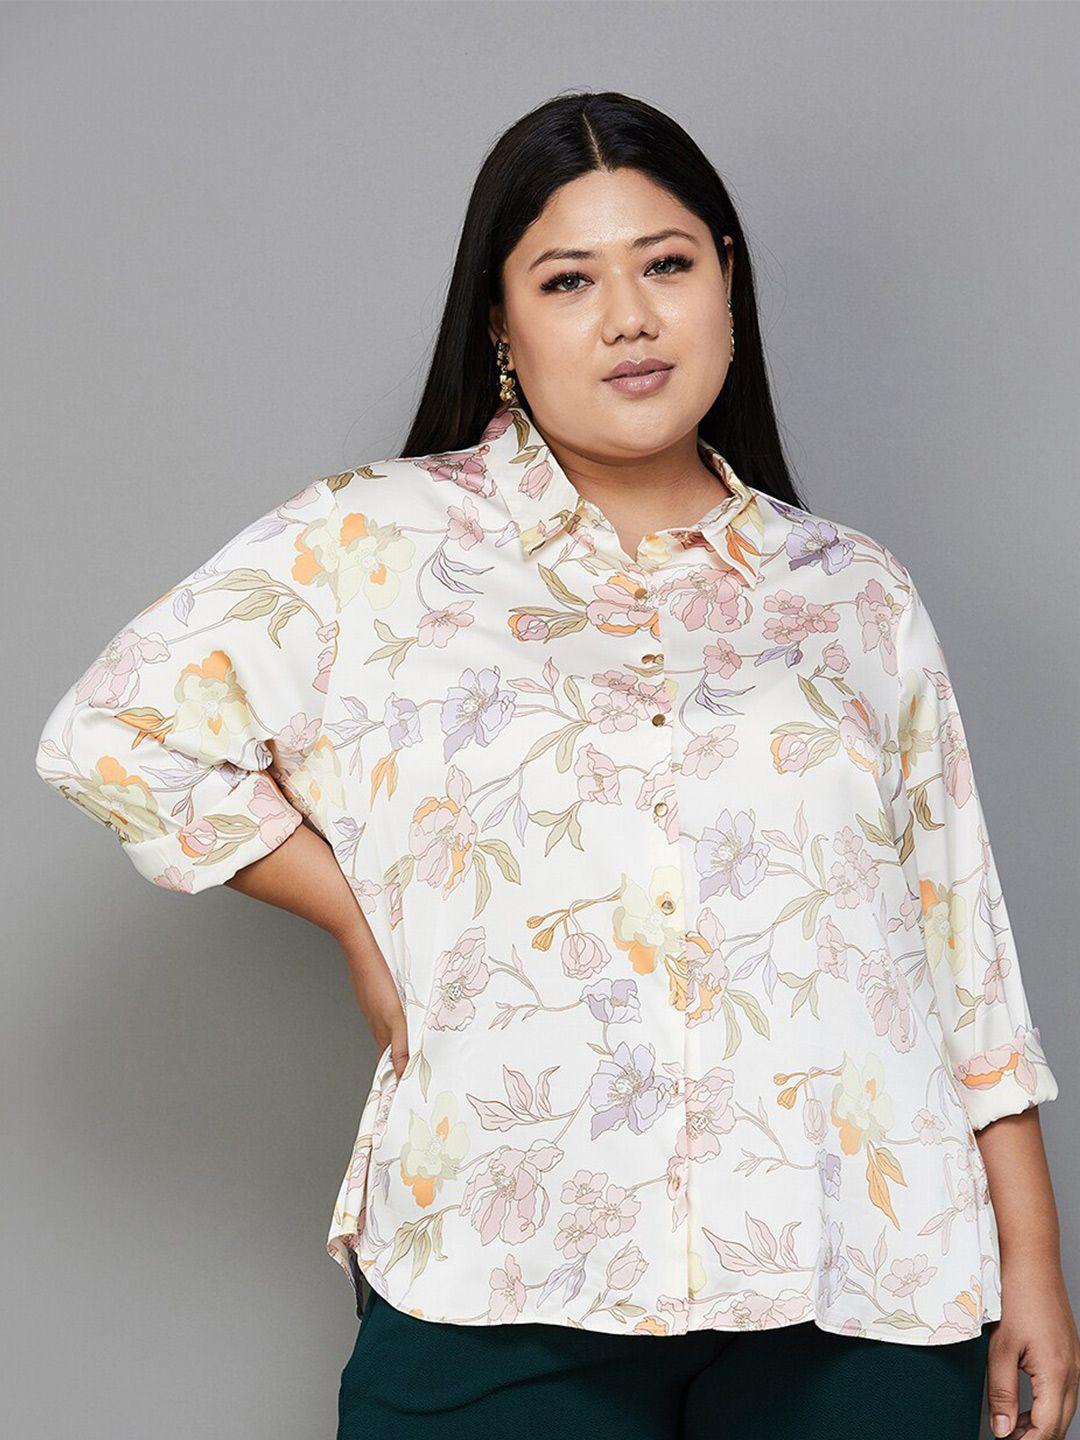 nexus by lifestyle plus size floral printed spread collar shirt